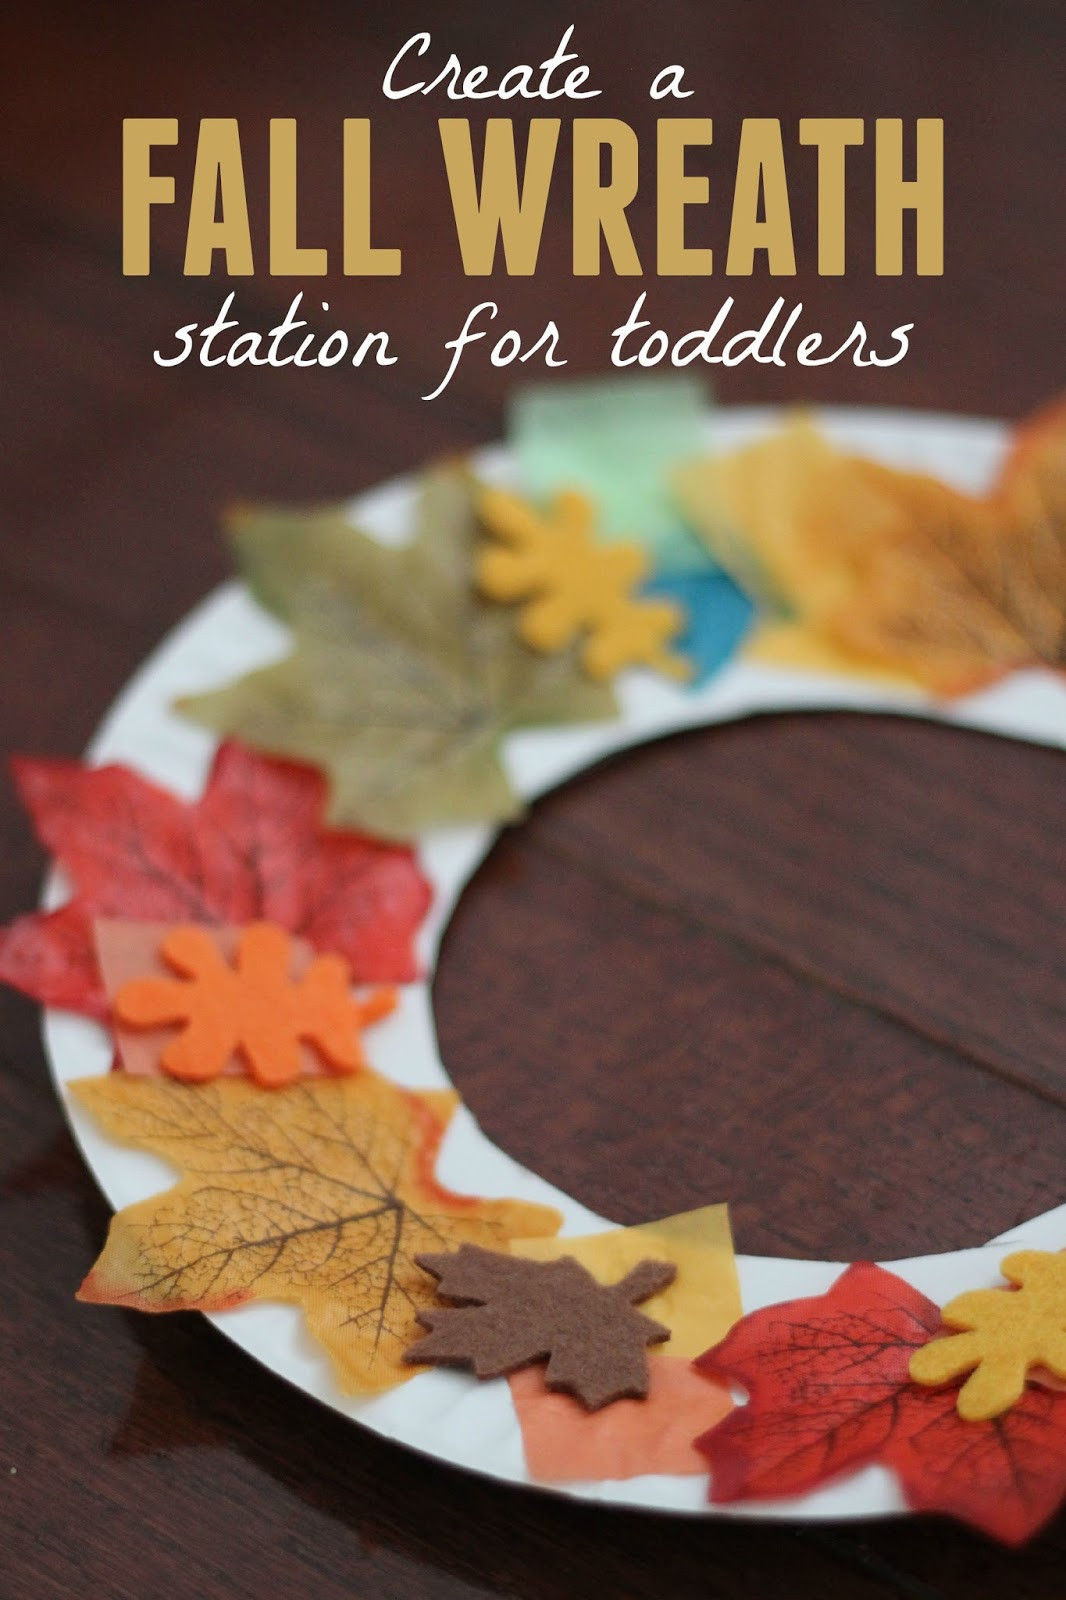 Kids Crafts For Fall
 Toddler Approved Fall Wreath Making Station for Toddlers